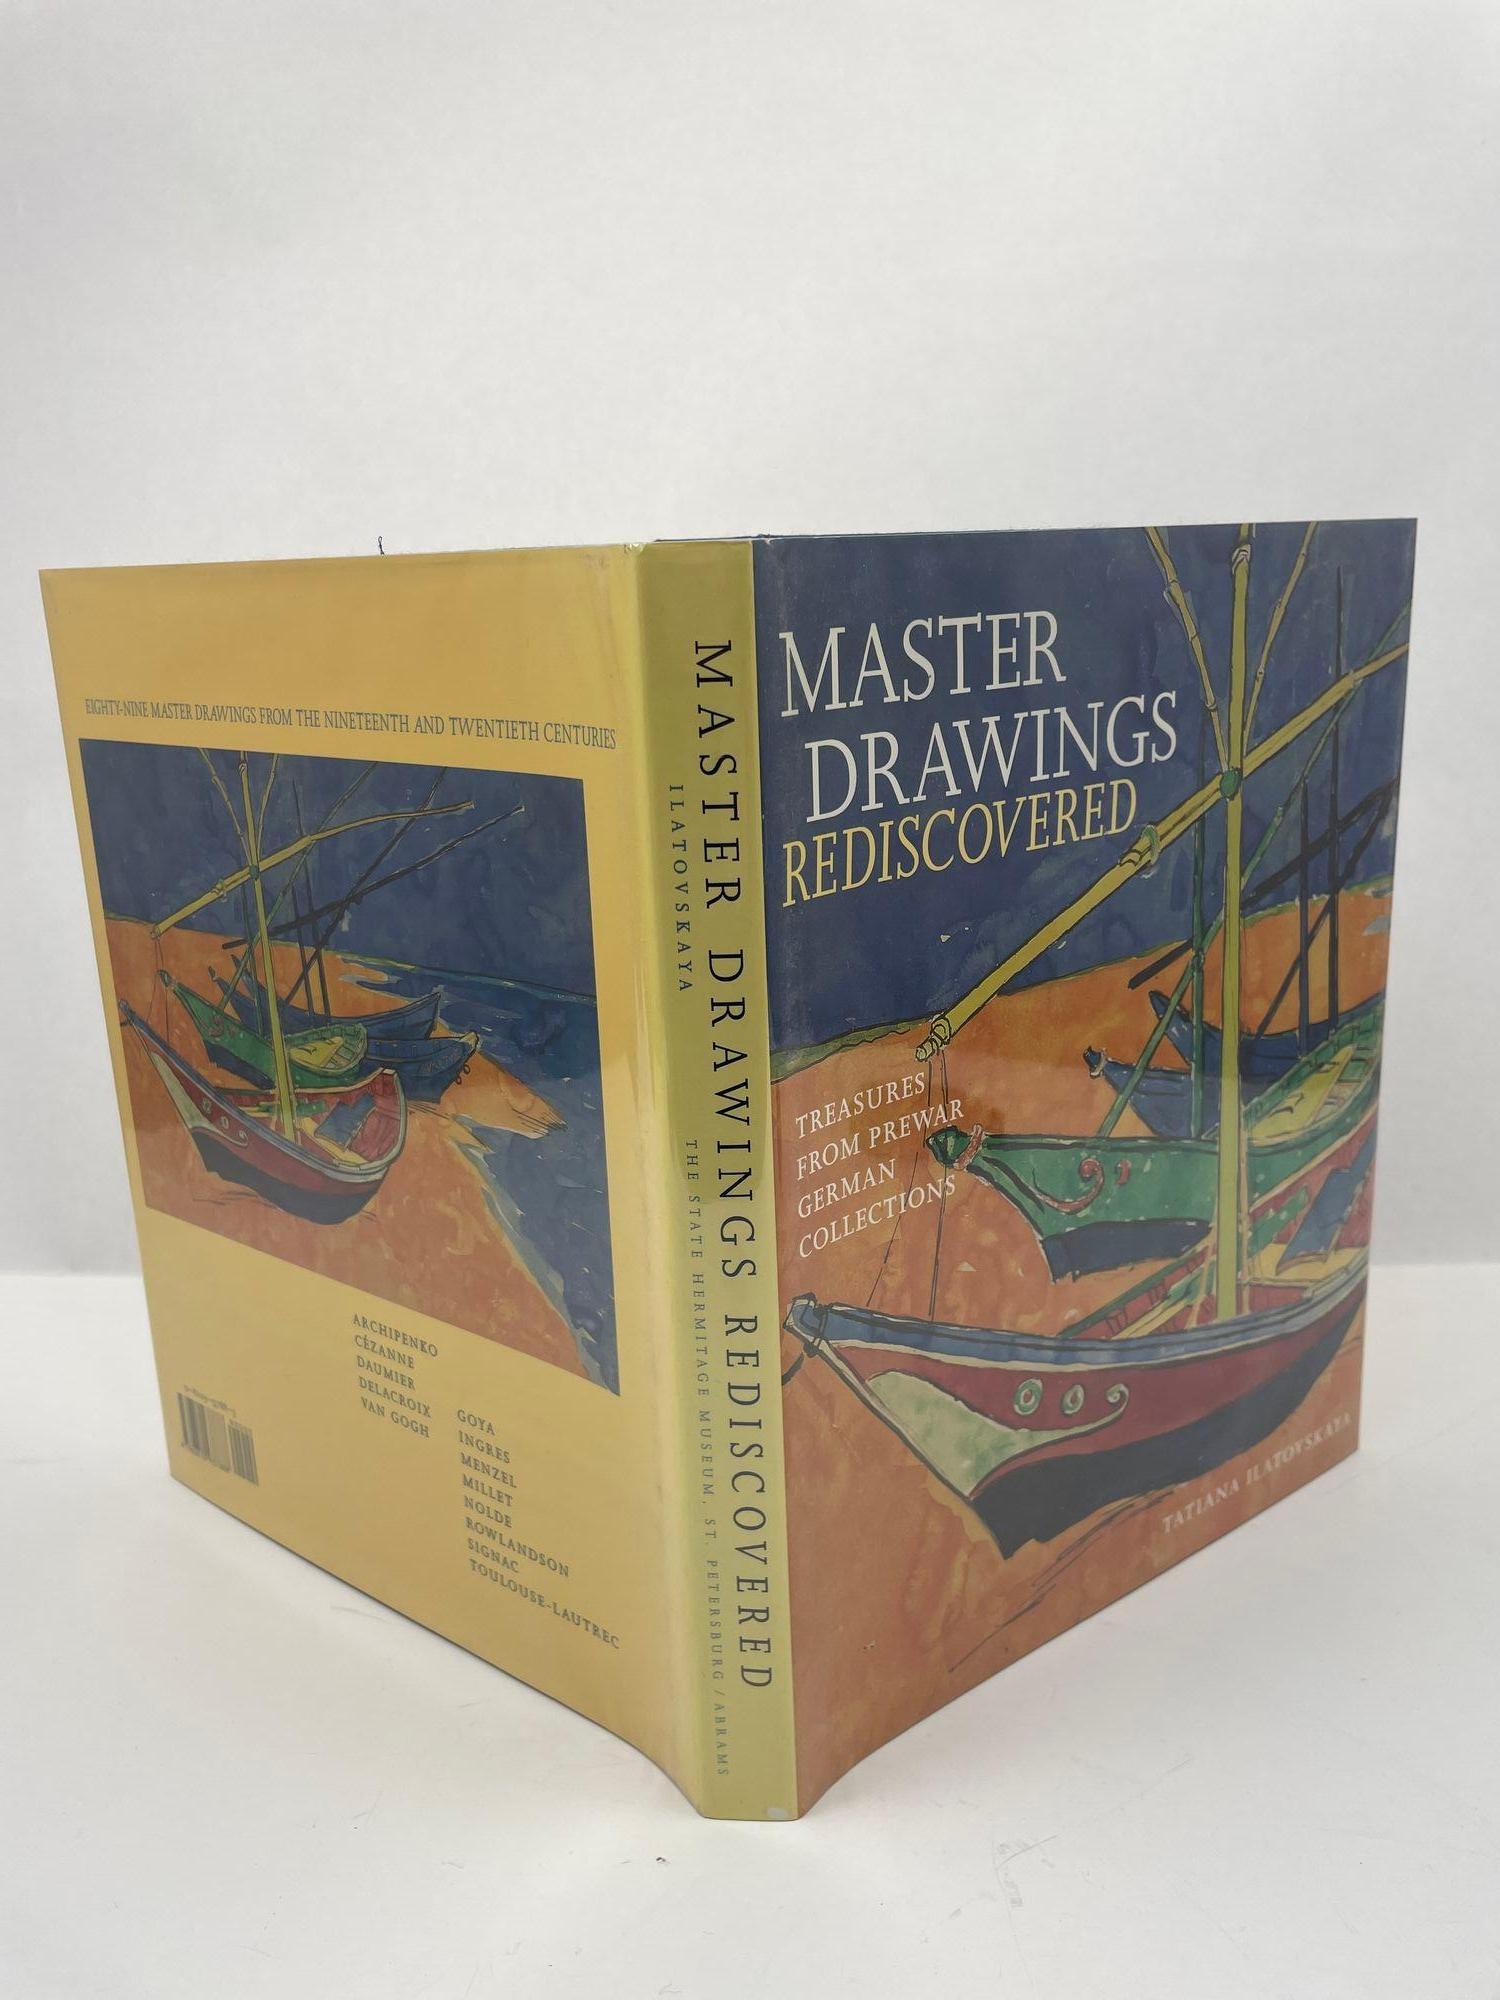 20th Century Master Drawings Rediscovered Treasures from Prewar German Collections For Sale